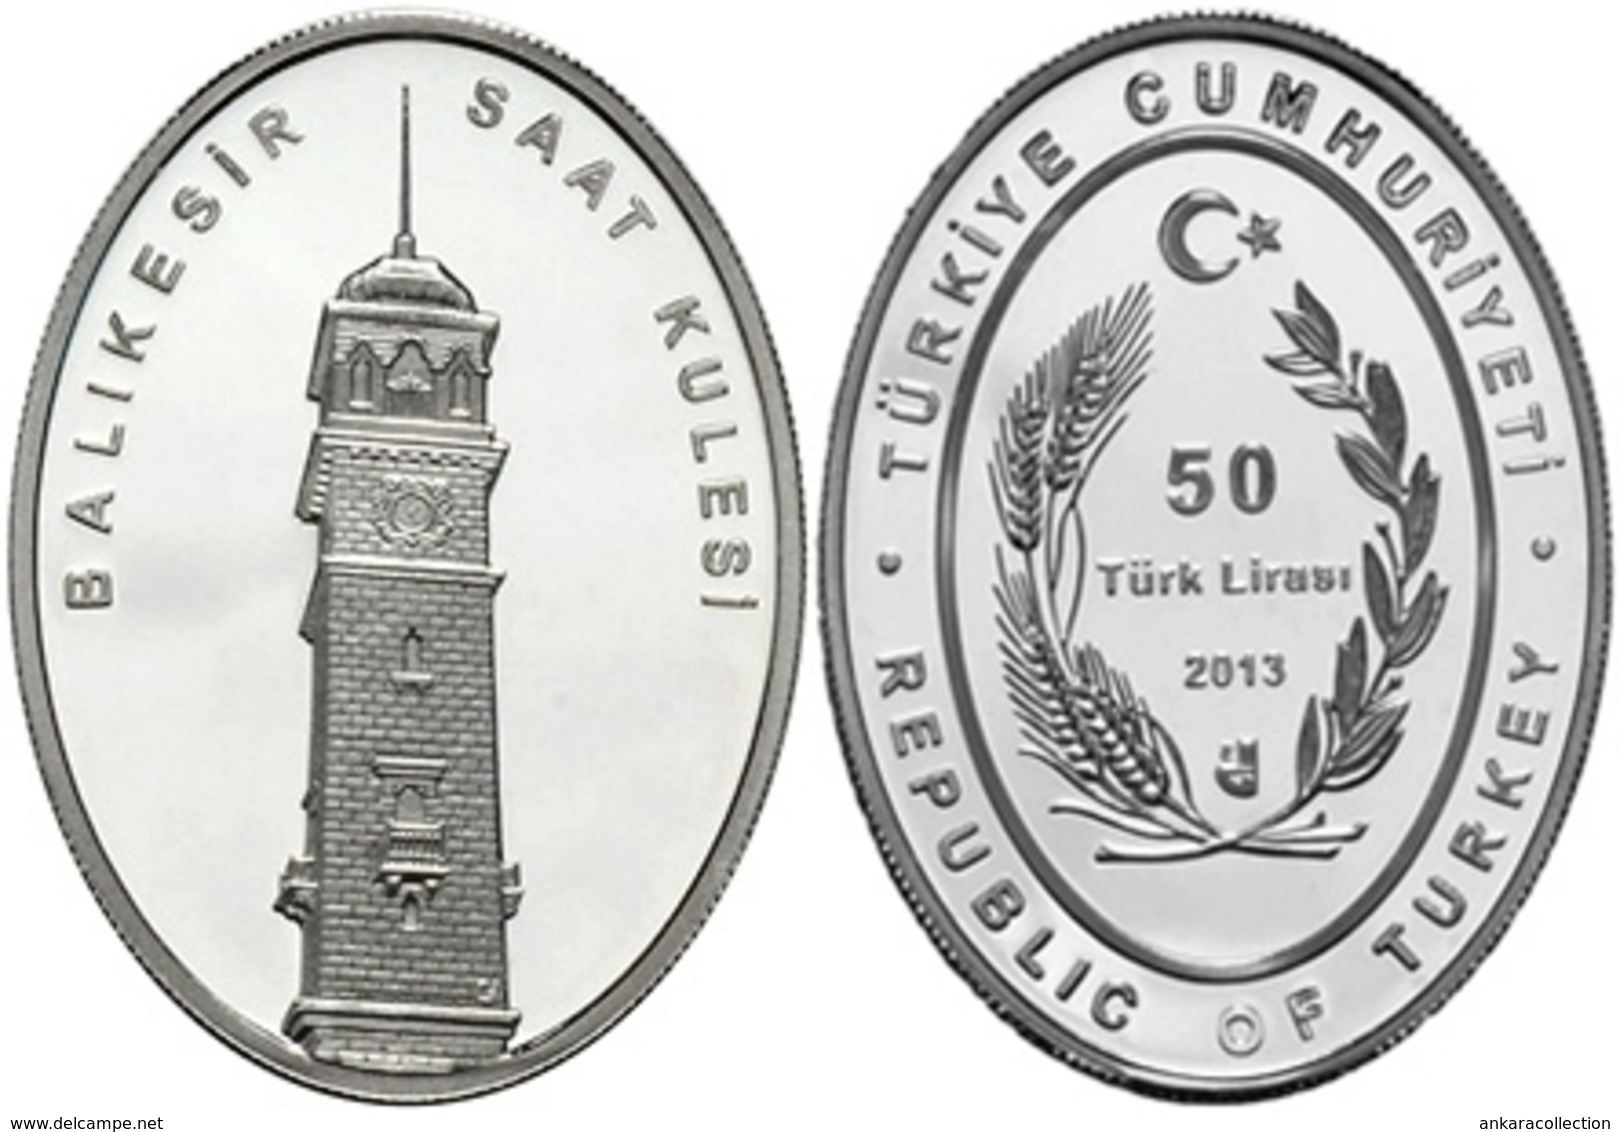 AC - BALIKESIR CLOCK TOWER CLOCK TOWER SERIES # 4 COMMEMORATIVE SILVER COIN TURKEY 2013 PROOF UNCIRCULATED - Ohne Zuordnung